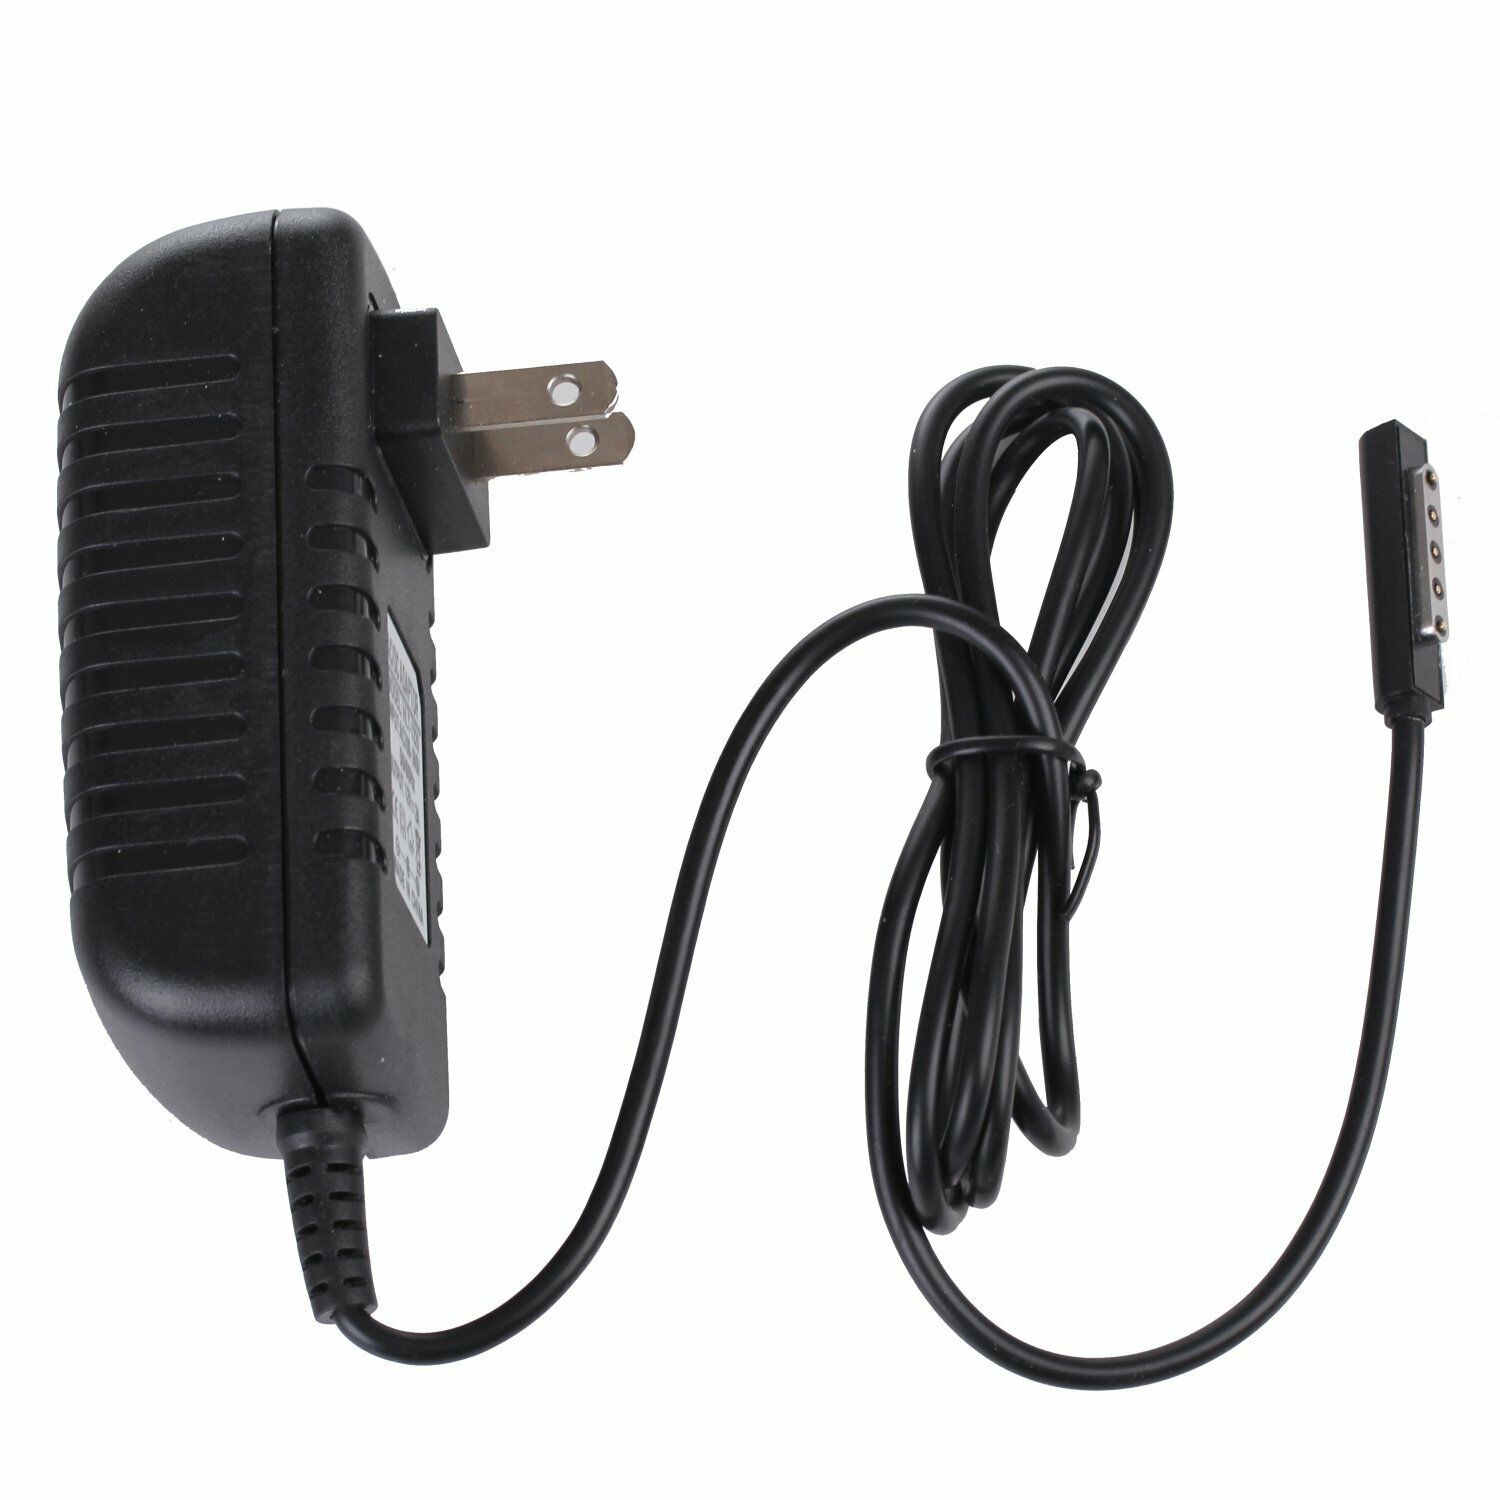 AC Adapter Charger for Microsoft Surface 2 Surface RT 2 Windows 8 Tablet US SHI Type: Wall Charge